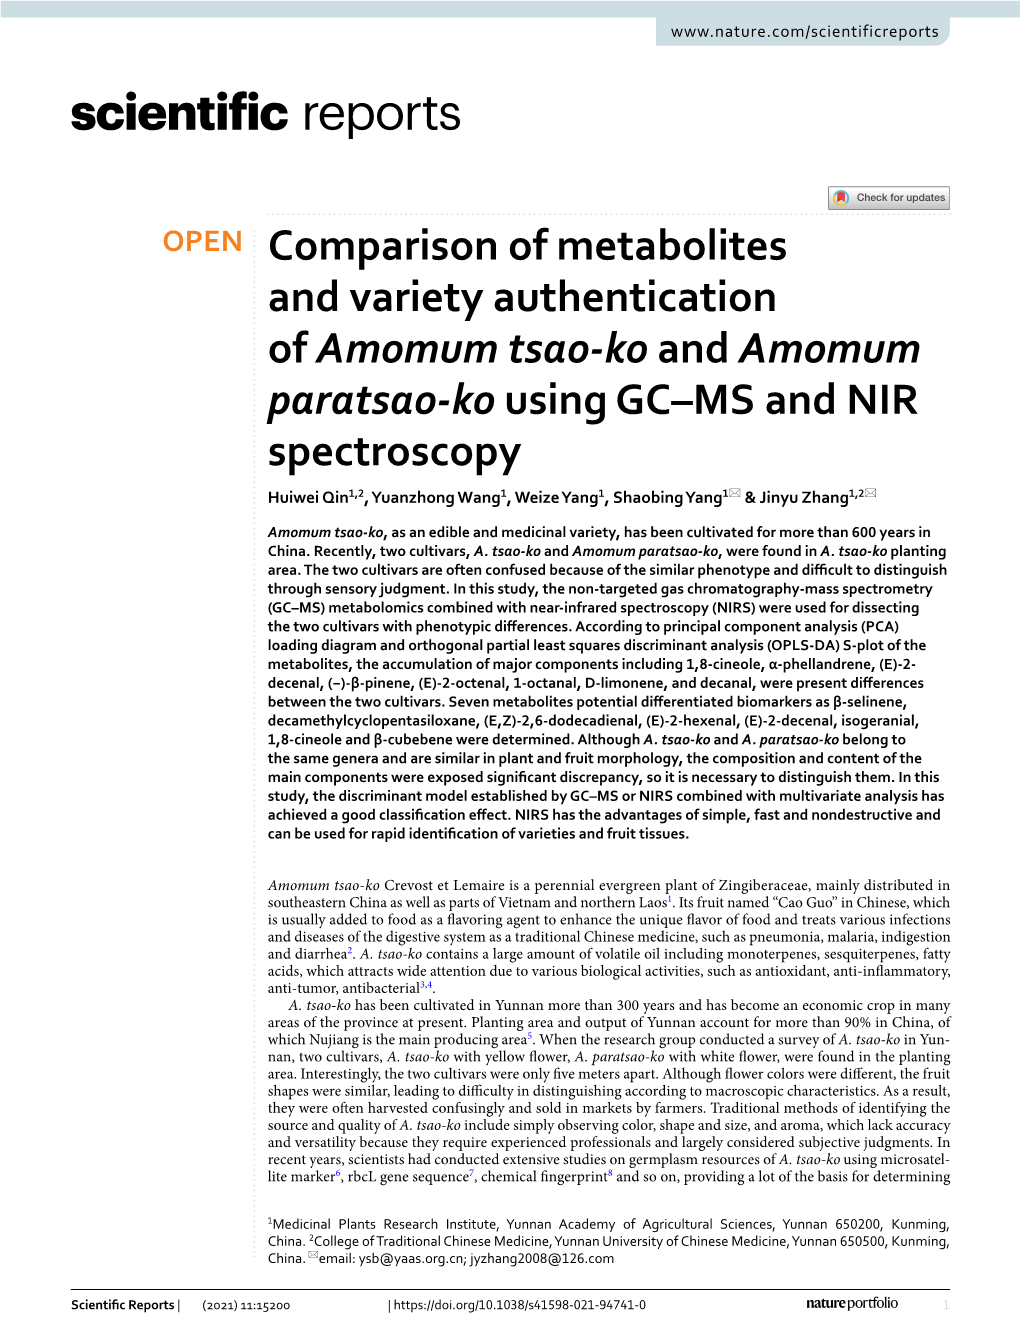 Comparison of Metabolites and Variety Authentication of Amomum Tsao-Ko